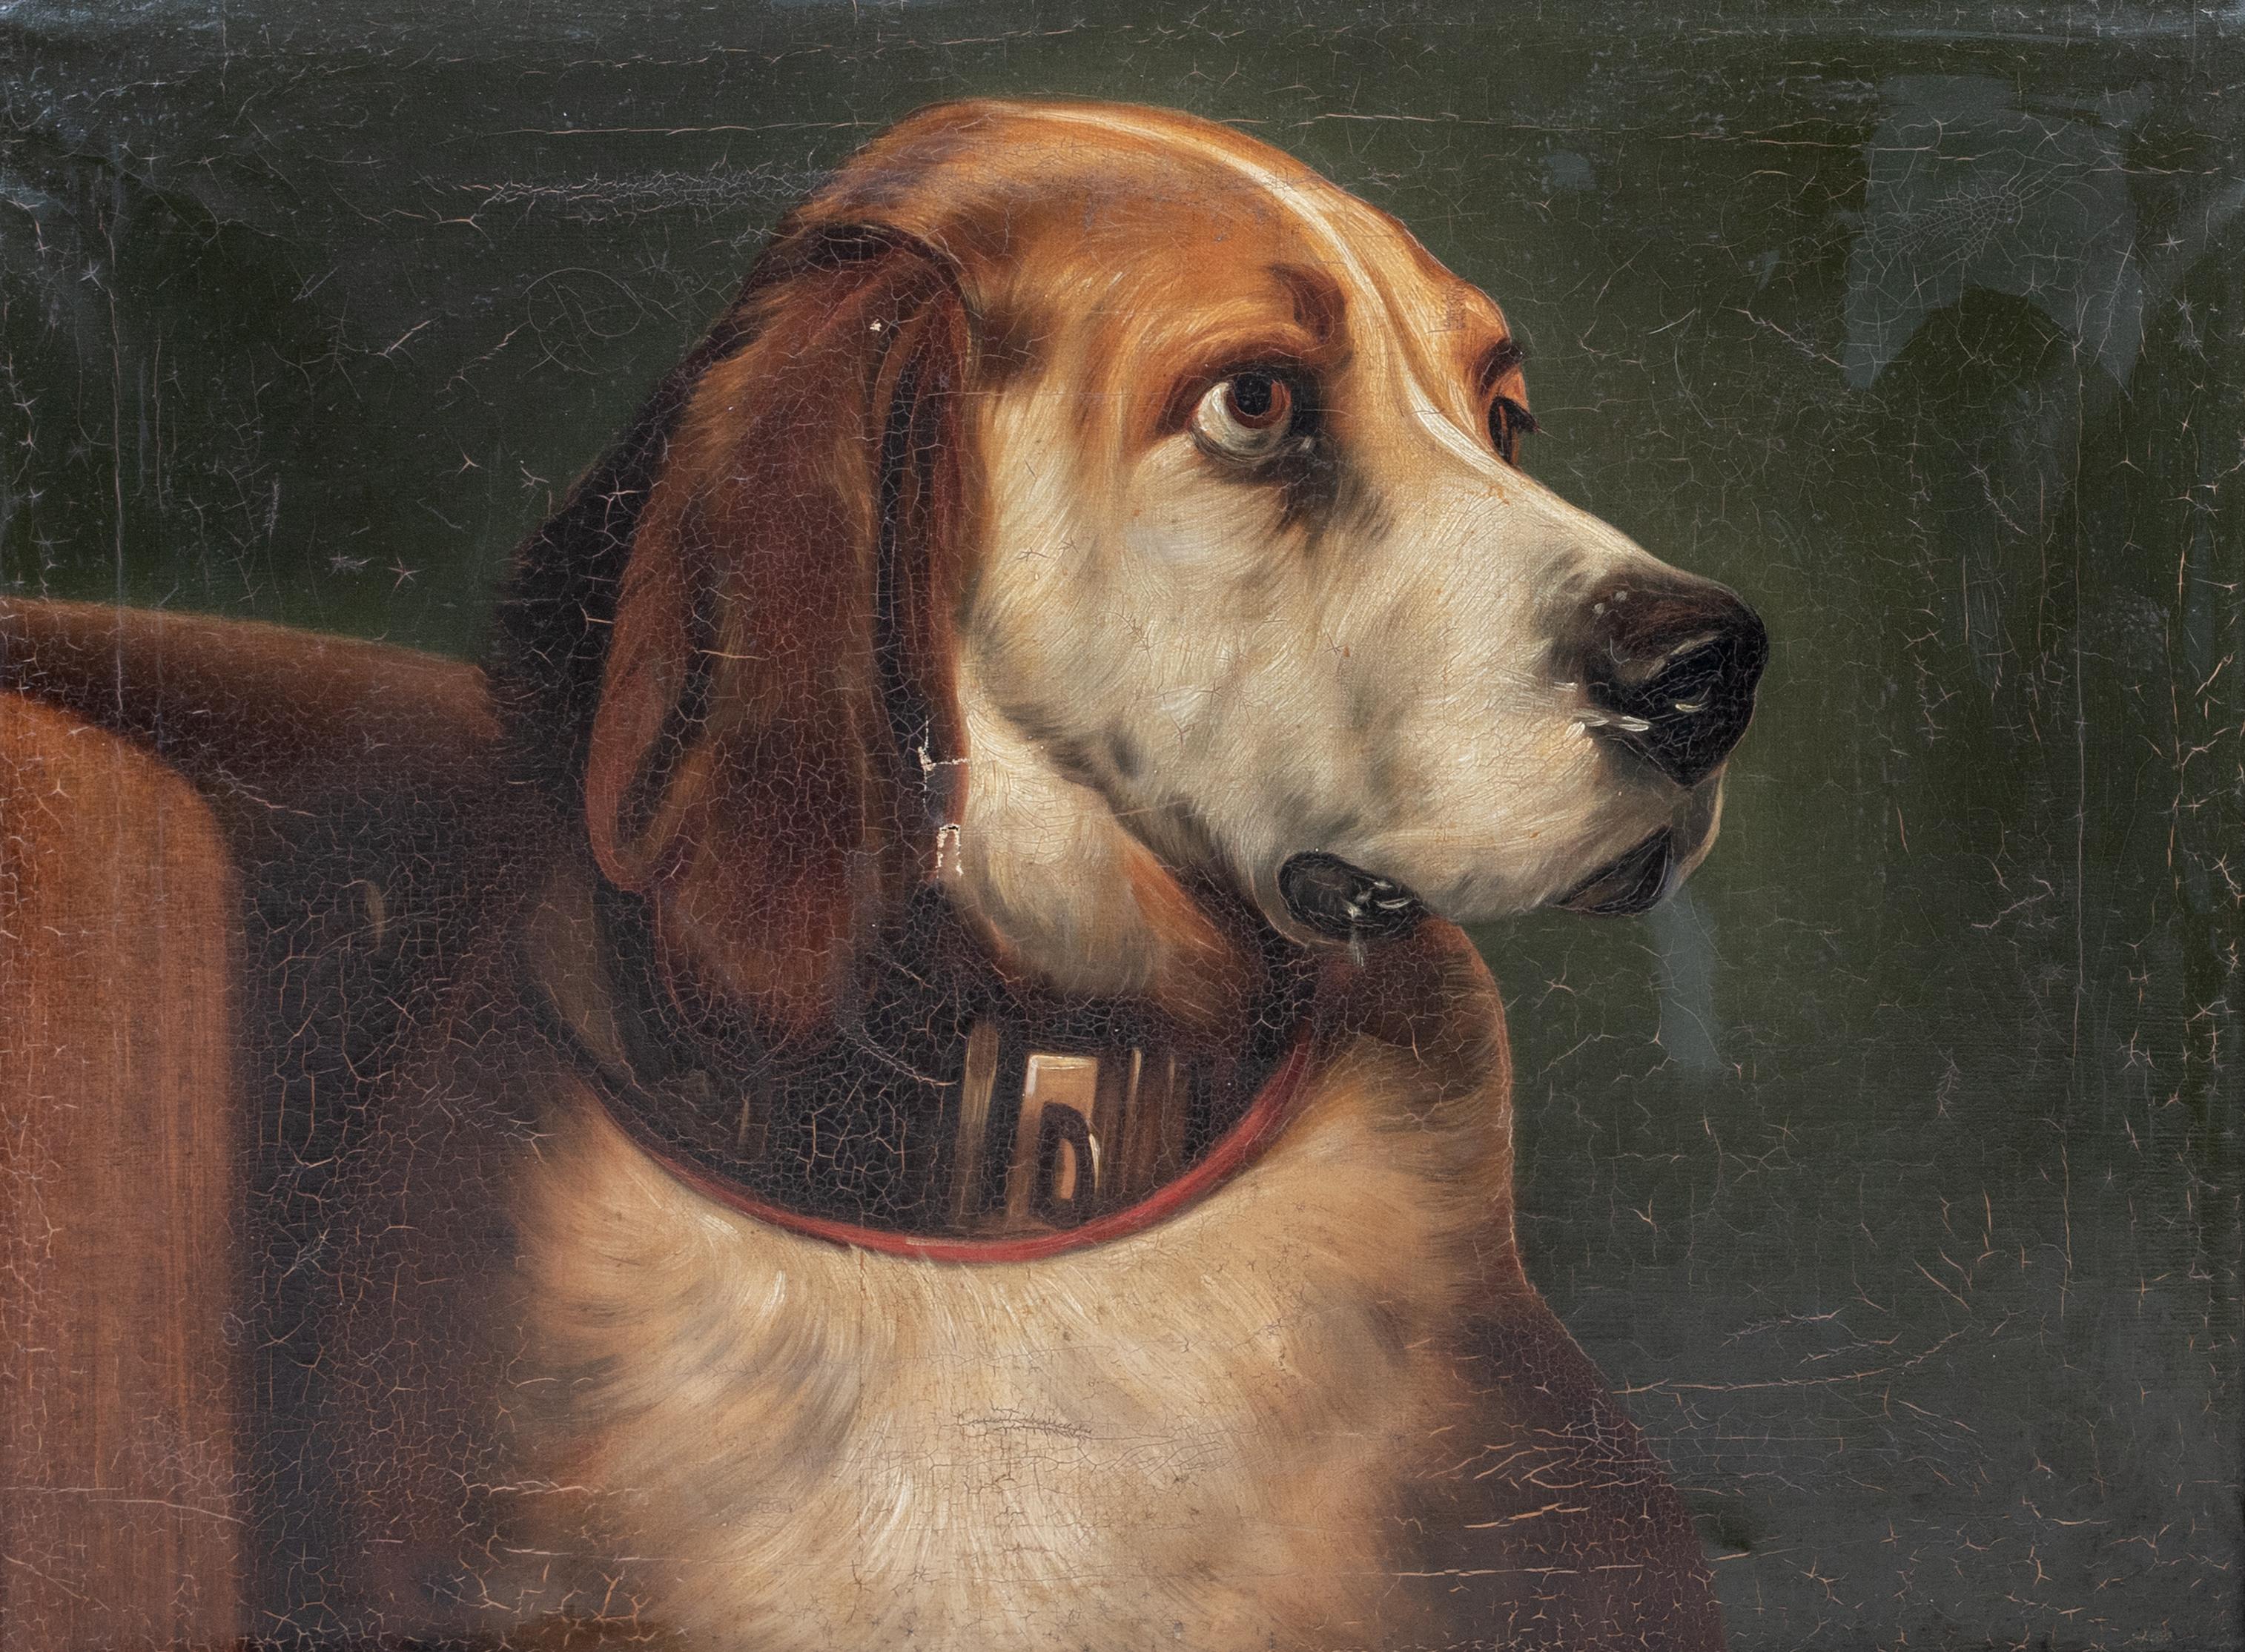 Portrait of Odin, A Bloodhound, 17th Century 

after Sir Edwin Henry Landseer (1802-1873)

Large 19th Century portrait of the head of a Bloodhound 